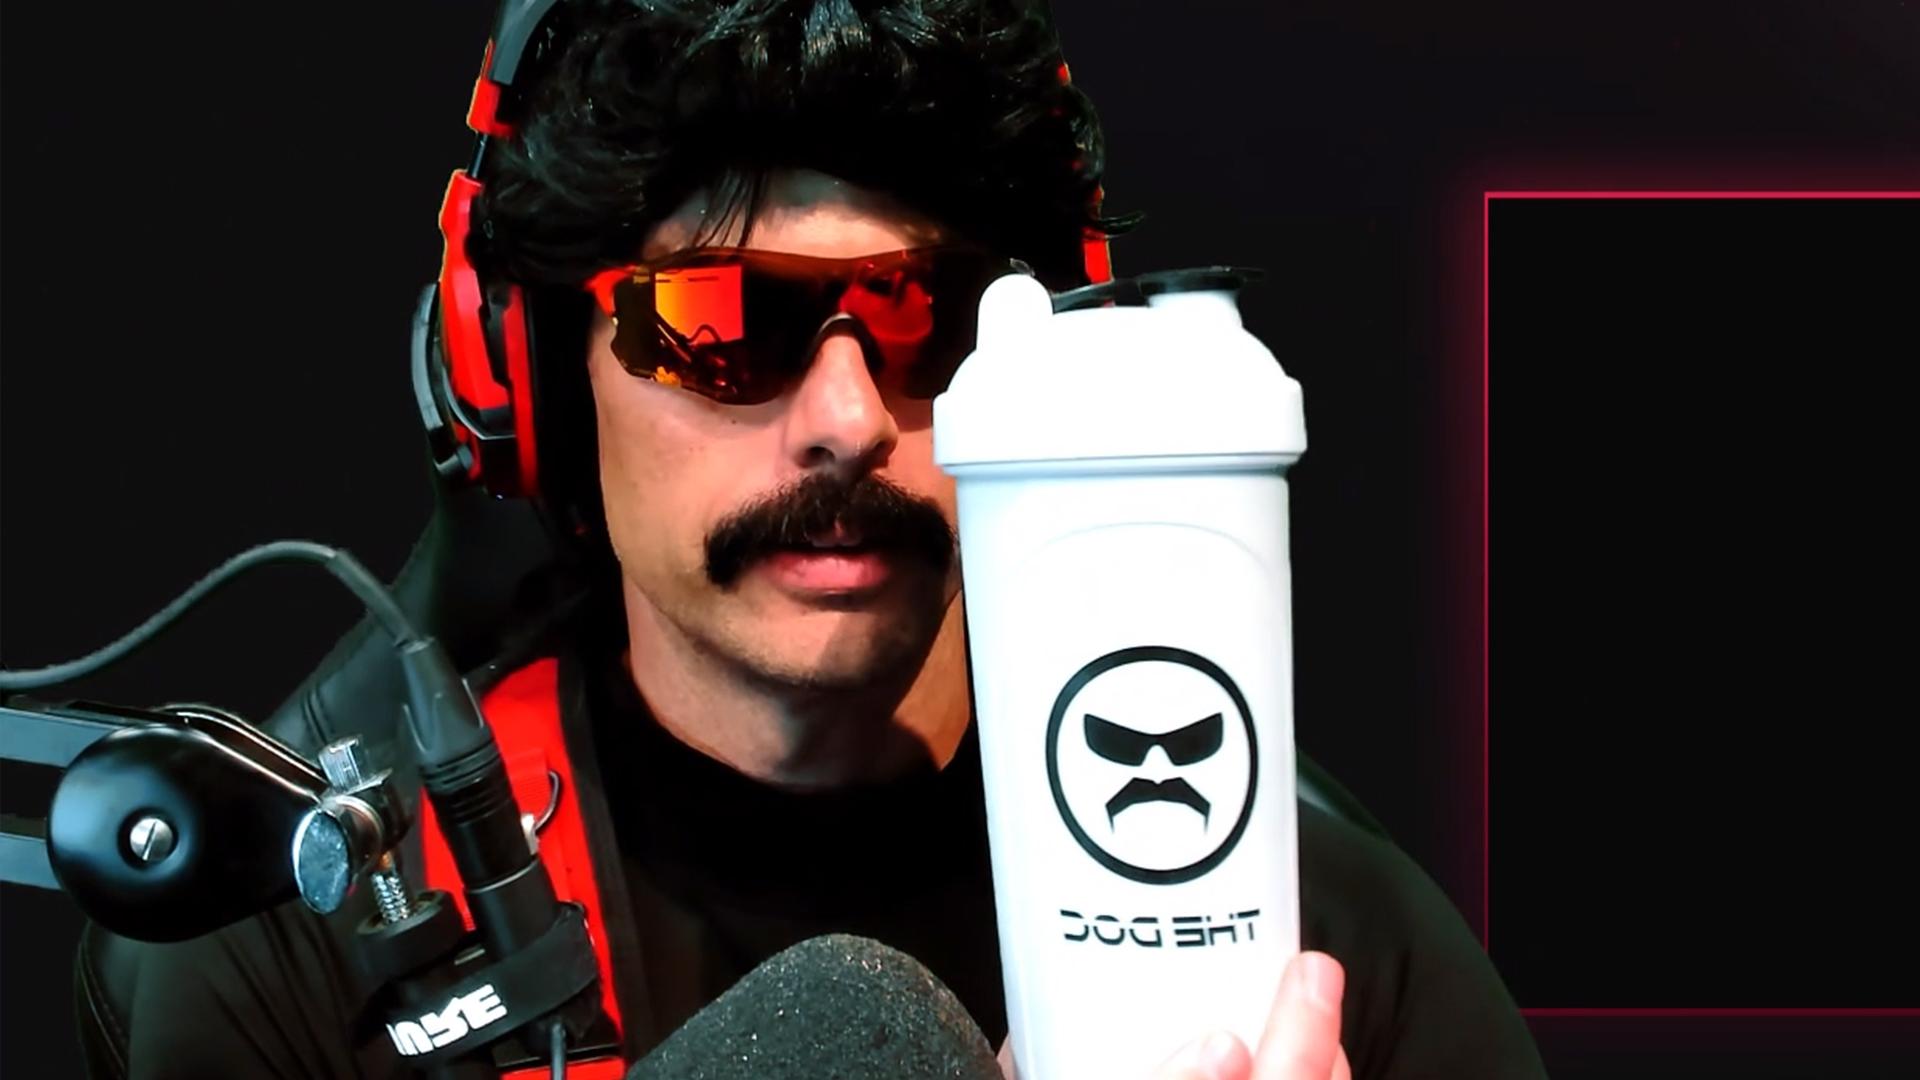 Dr DisRespect asserts that his new merch does not say 'dog sh*t